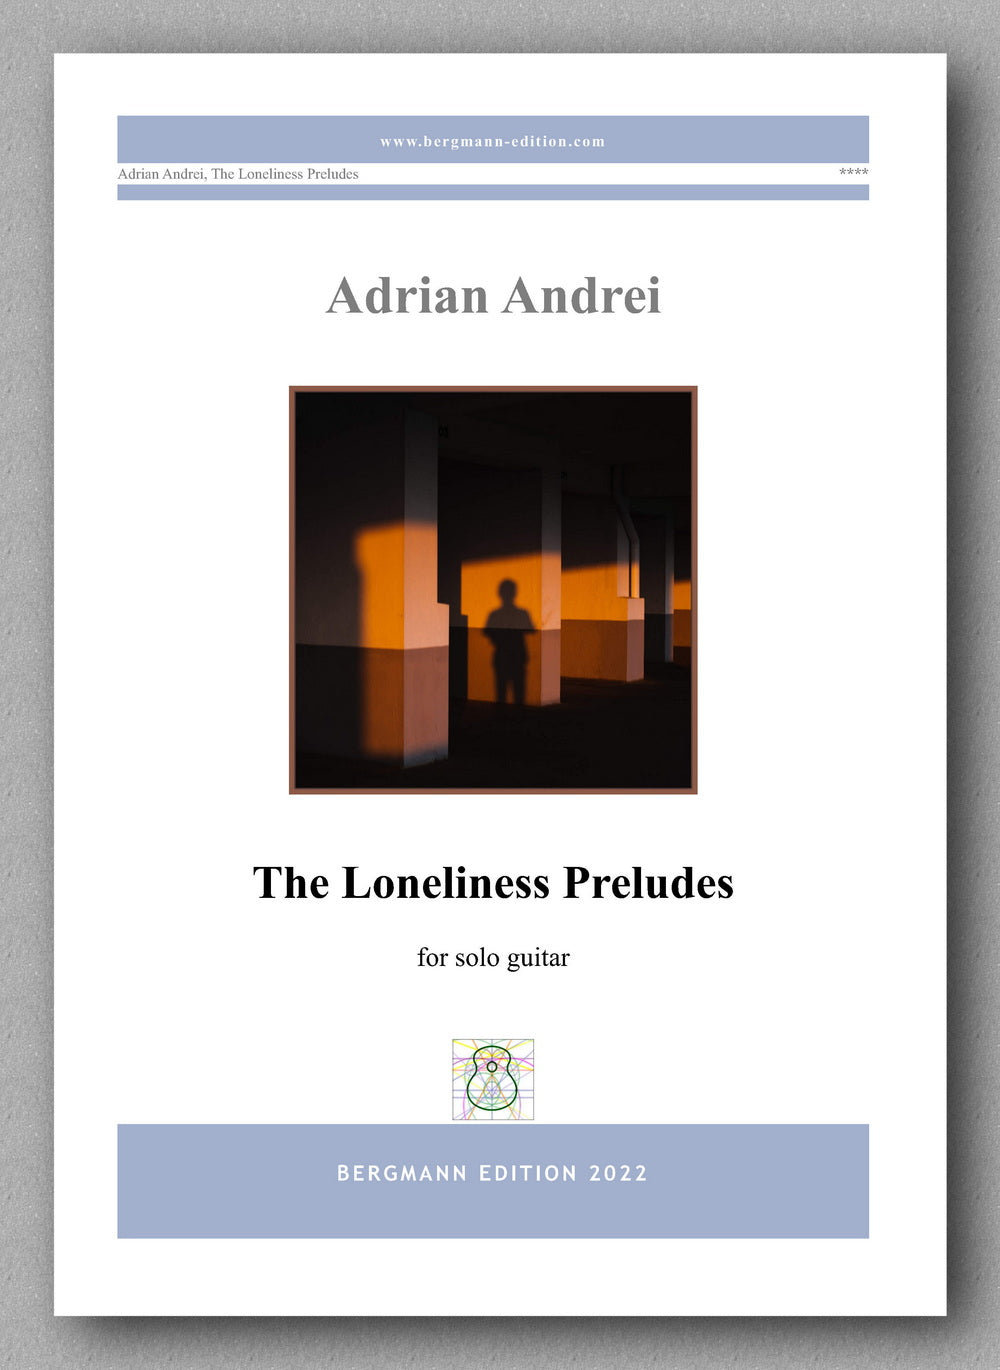 Adrian Andrei, The Loneliness Preludes - preview of the cover